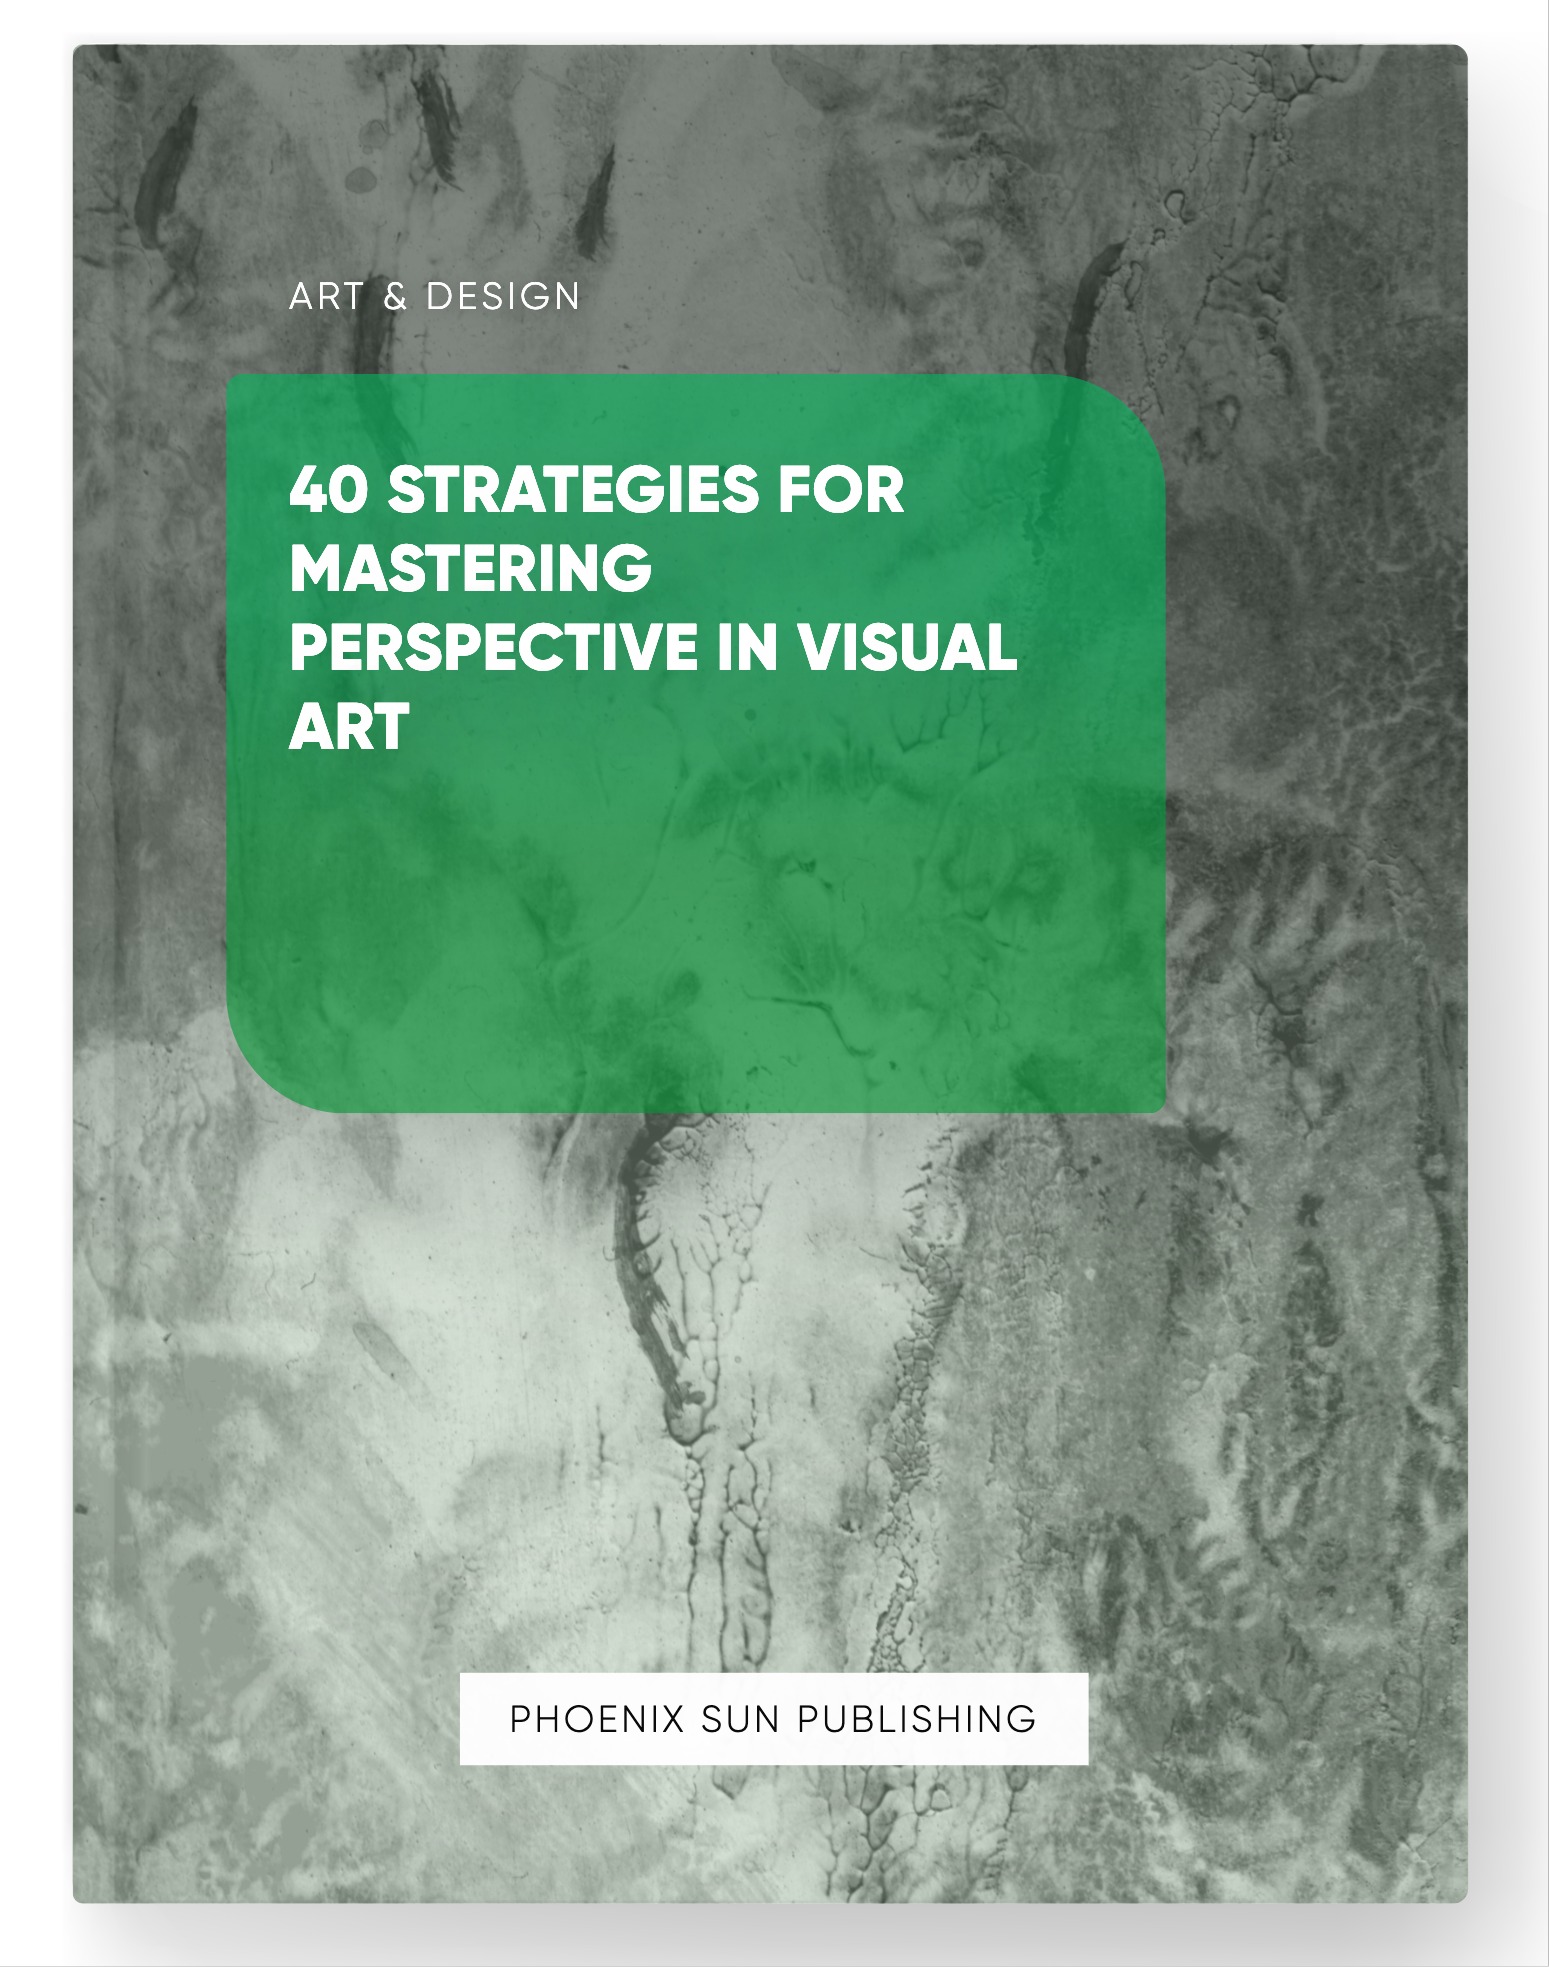 40 Strategies for Mastering Perspective in Visual Art